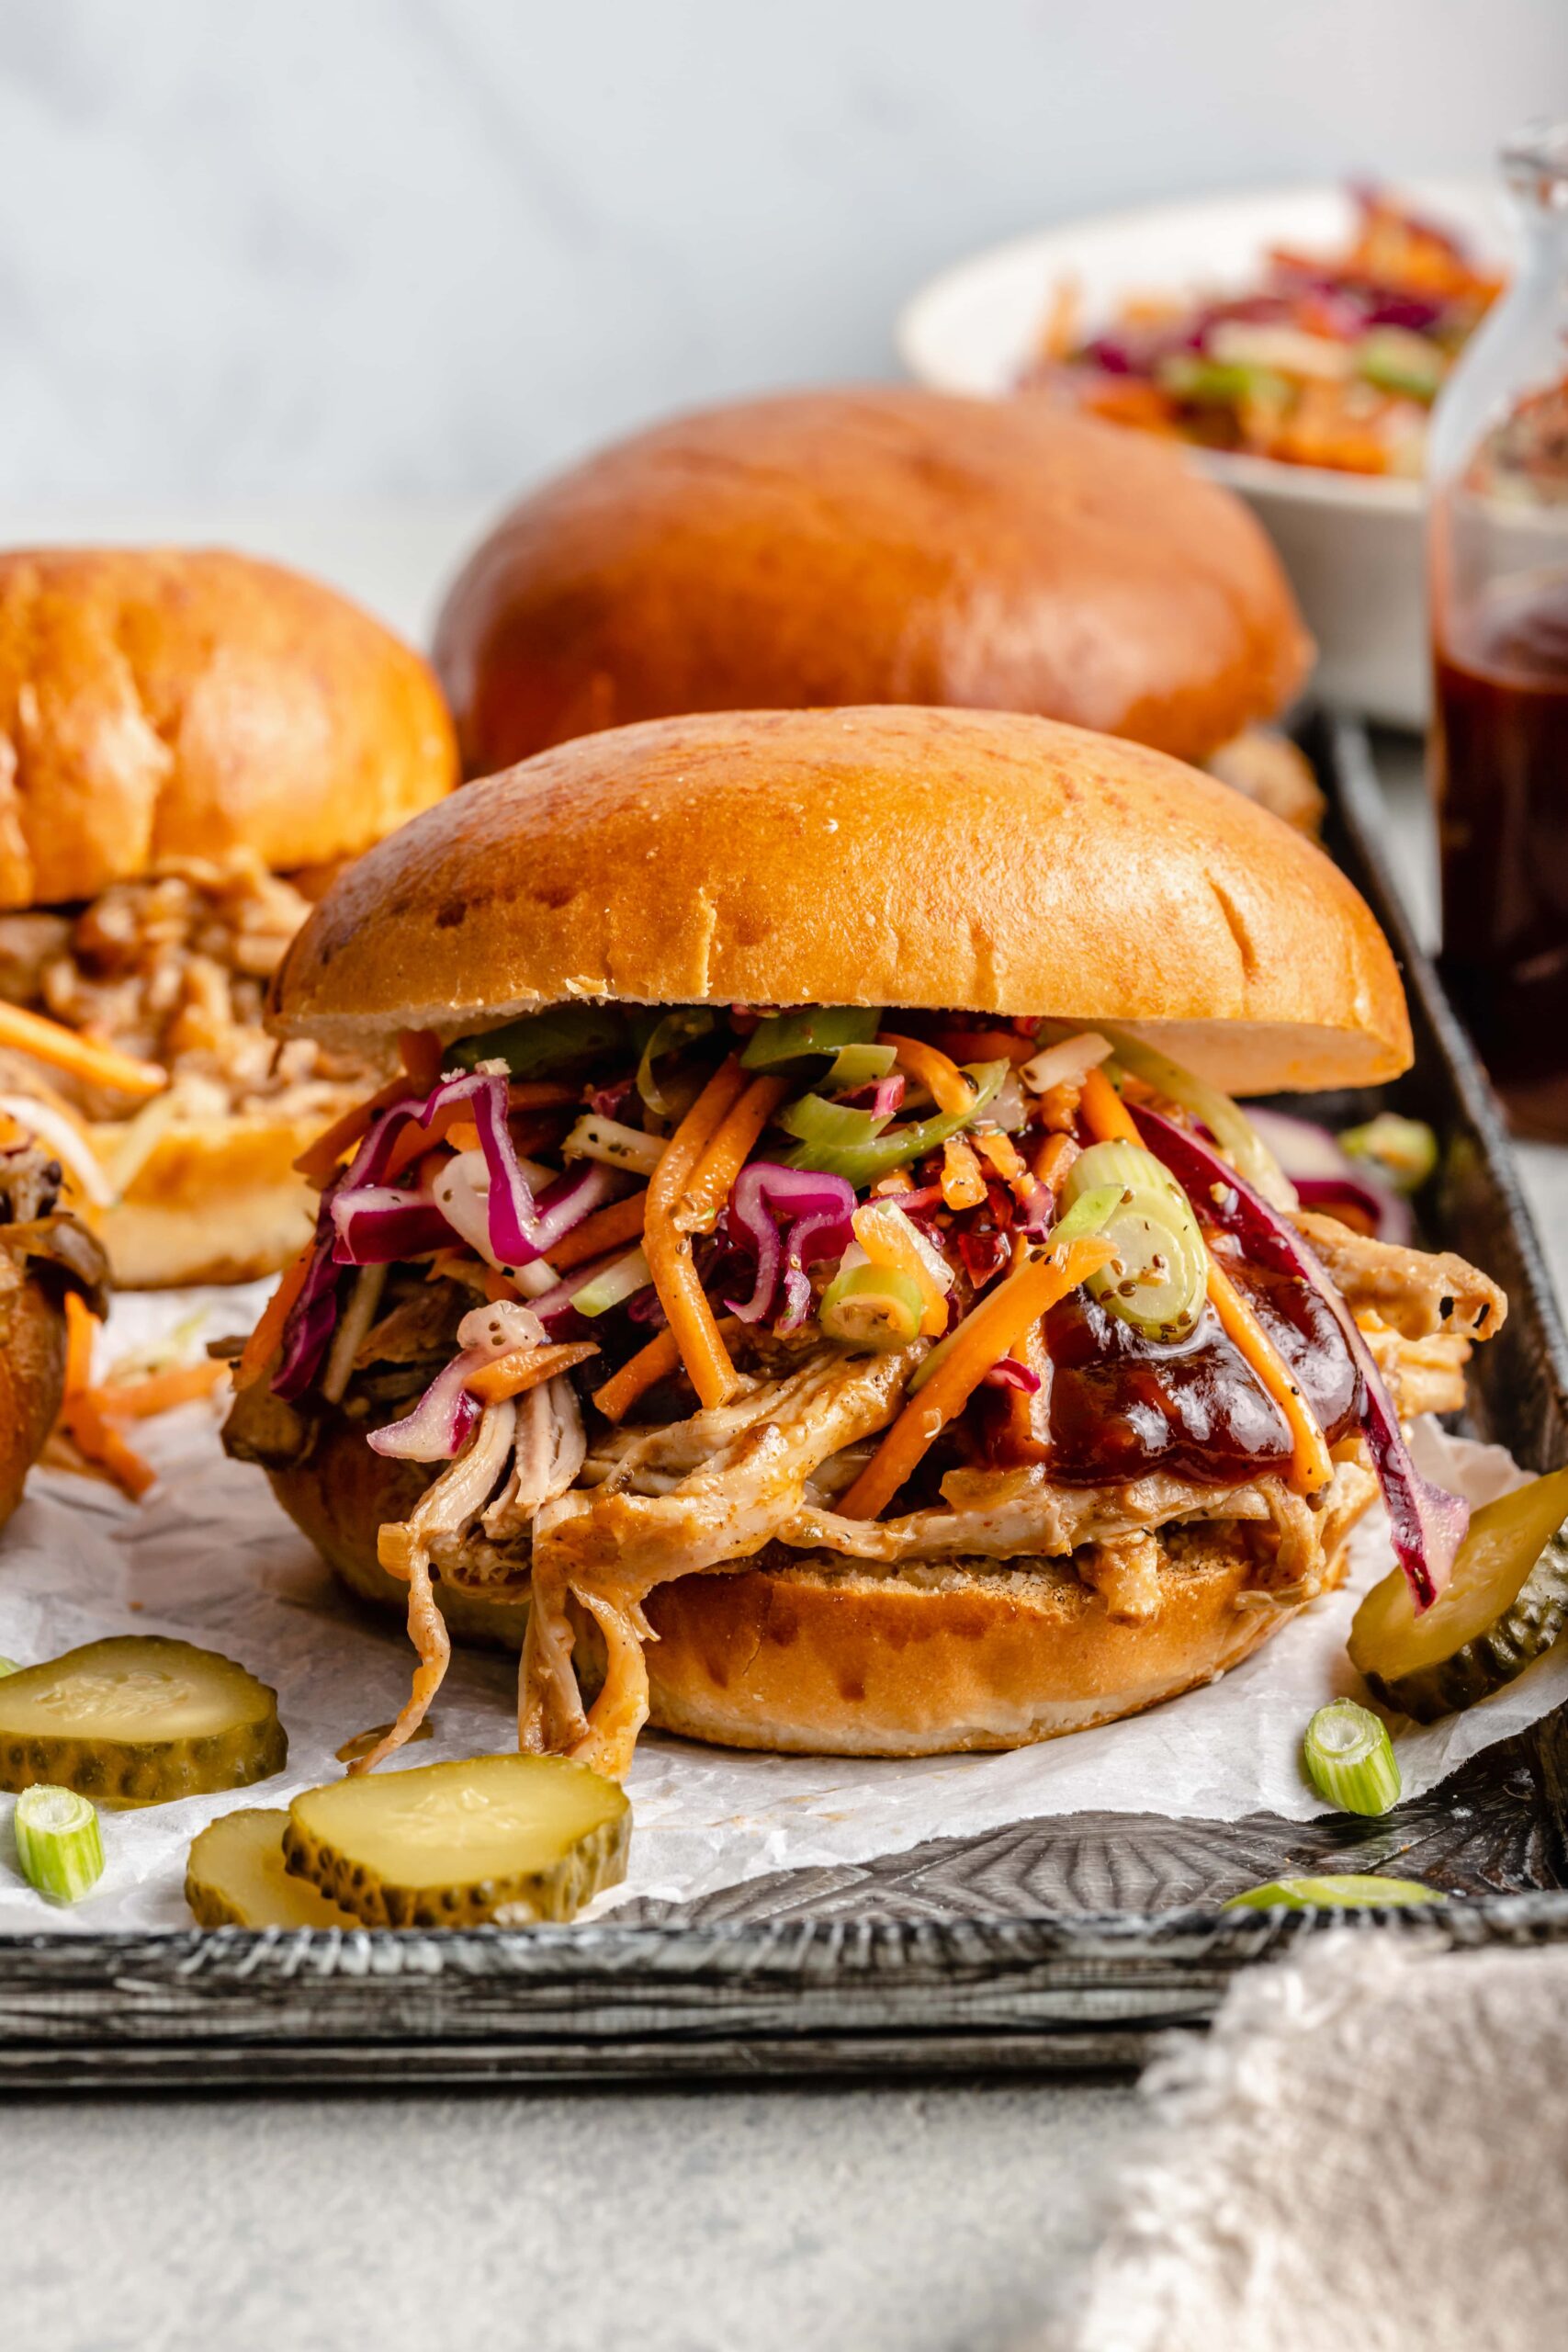 https://allthehealthythings.com/wp-content/uploads/2022/09/Slow-Cooker-Pulled-Pork-6-scaled.jpg